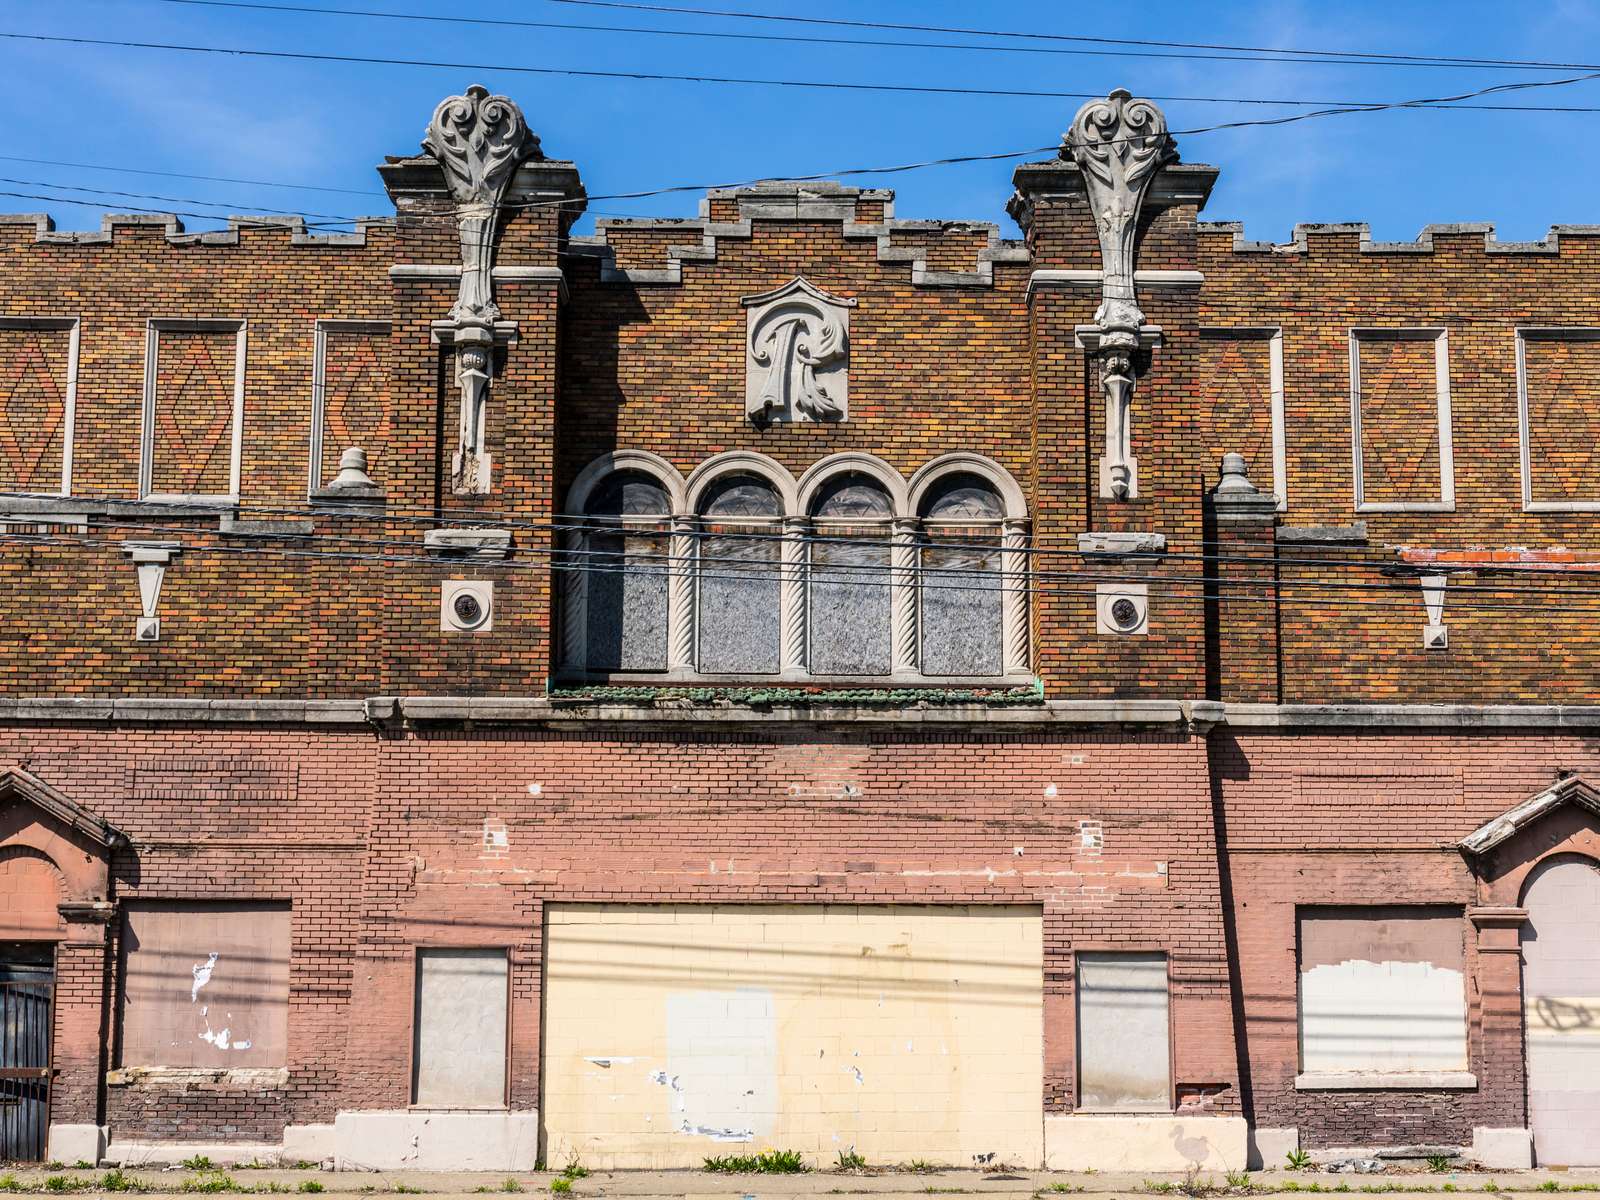 Ruins of the Ritz Theatre pictured in West Indy for a piece titled Is Indianapolis Safe to Visit